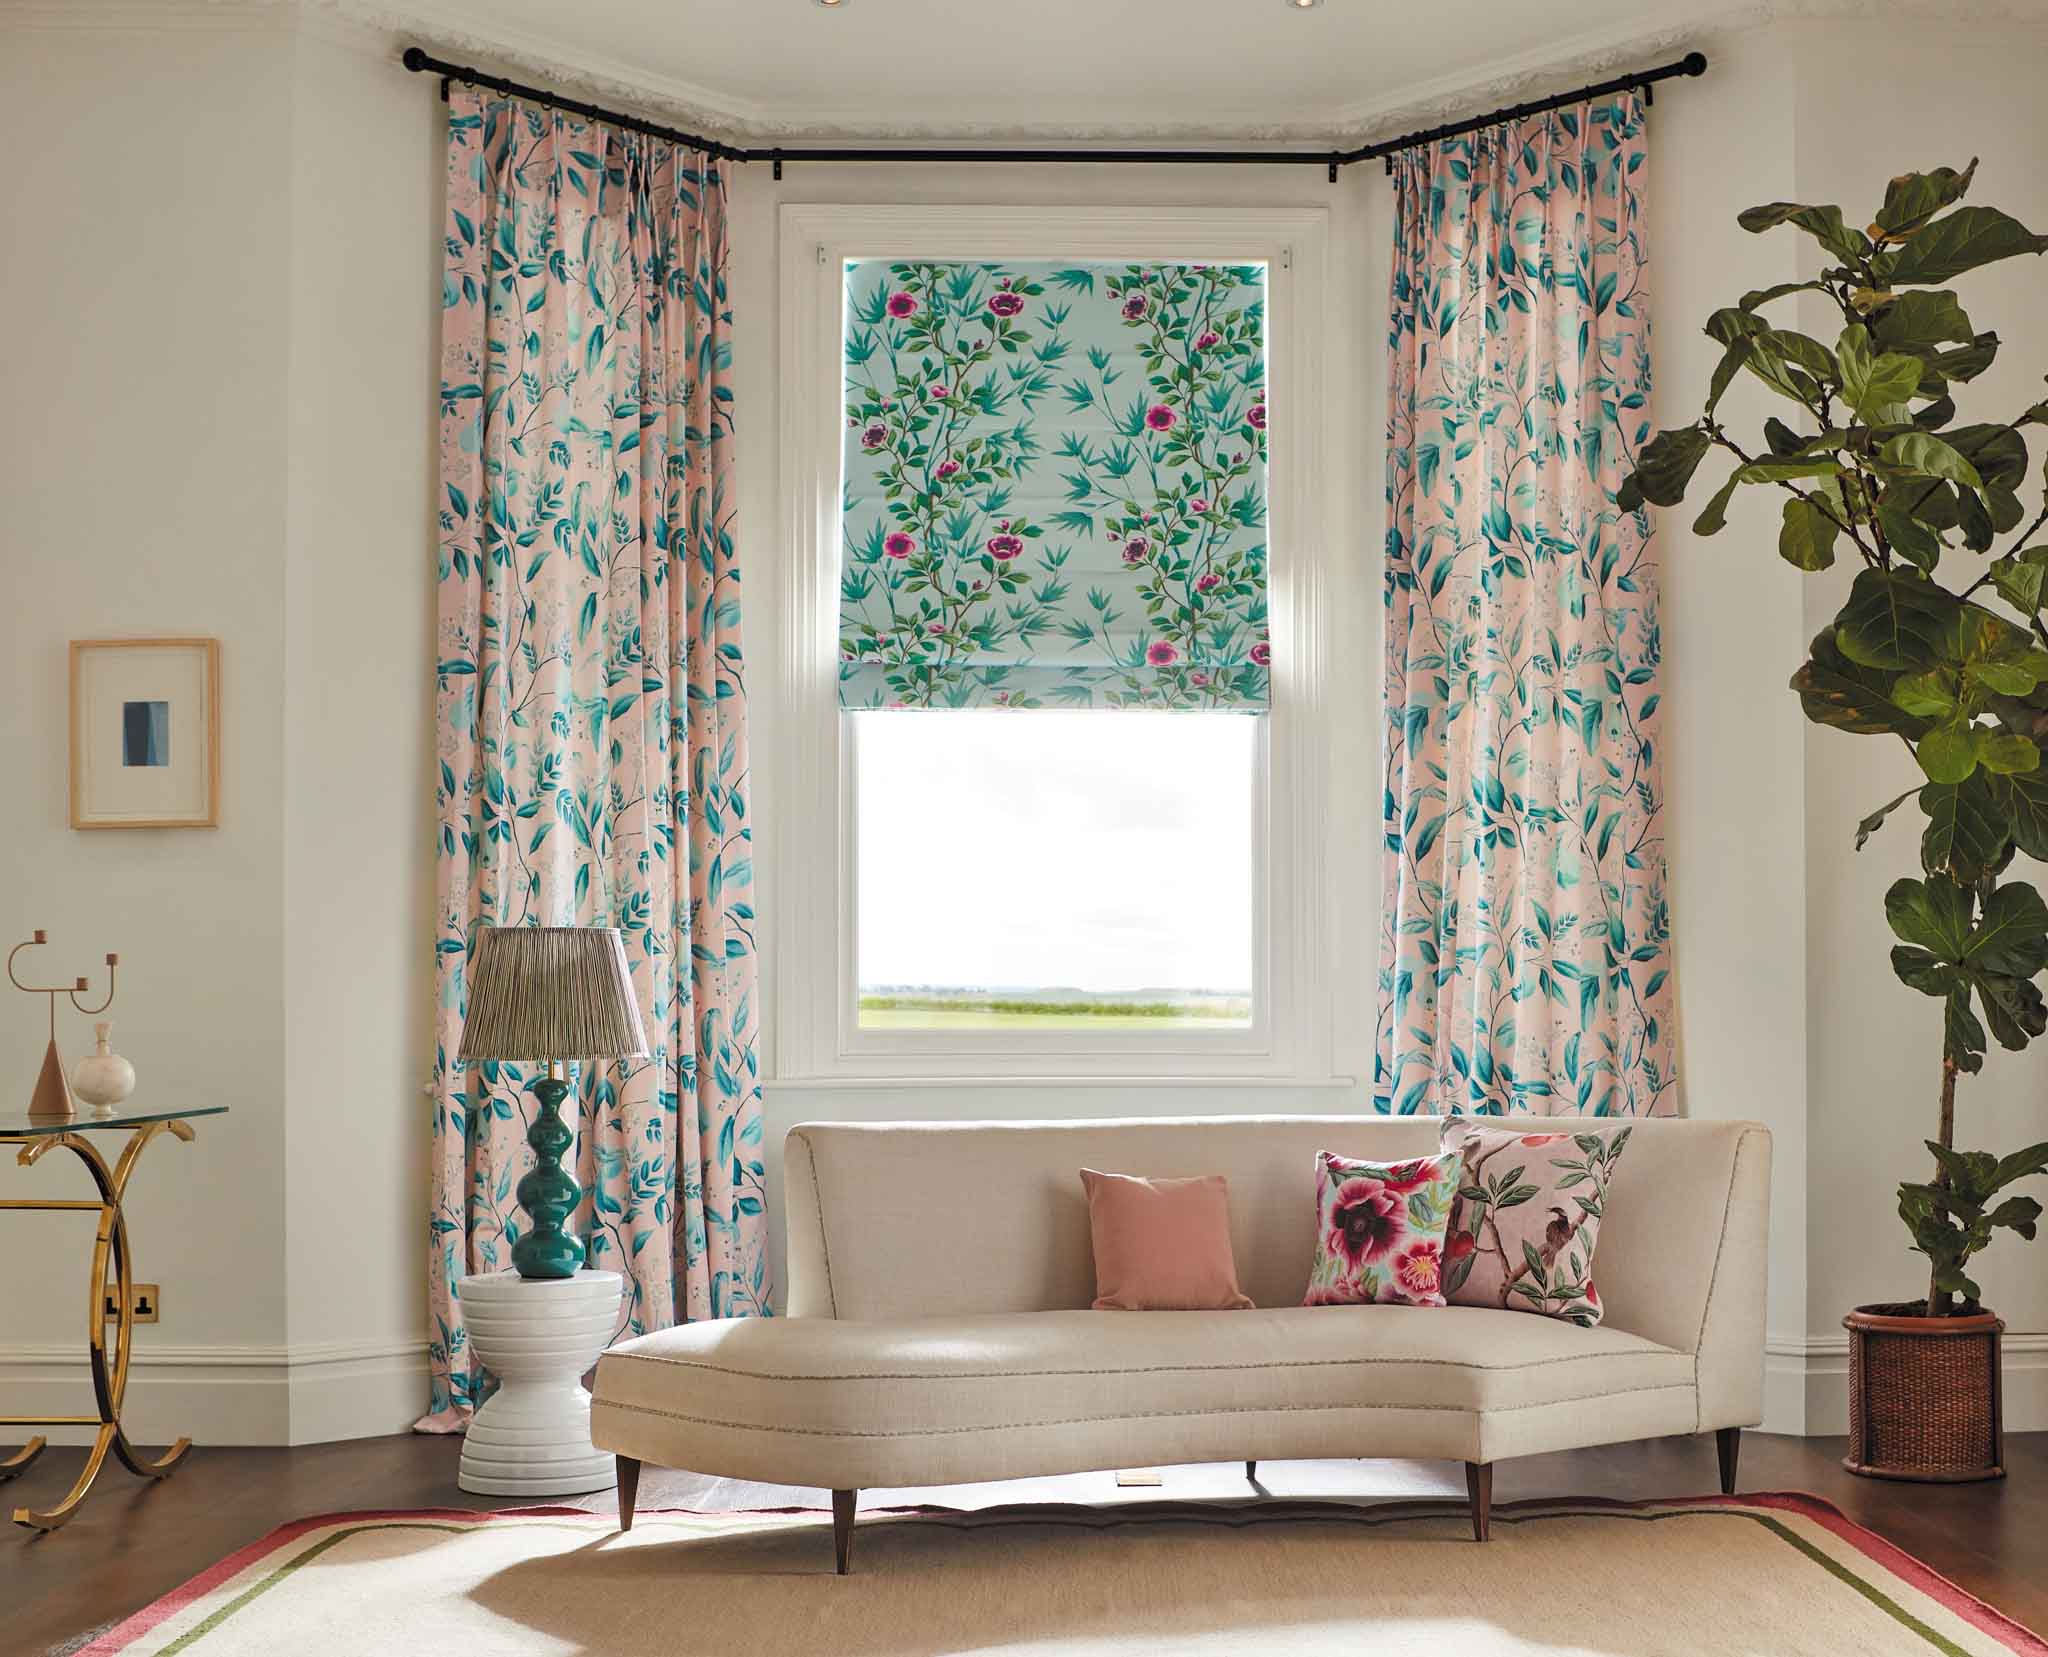 living room photo featuring blinds and curtains in Diane Hill's chinoiserie fabrics